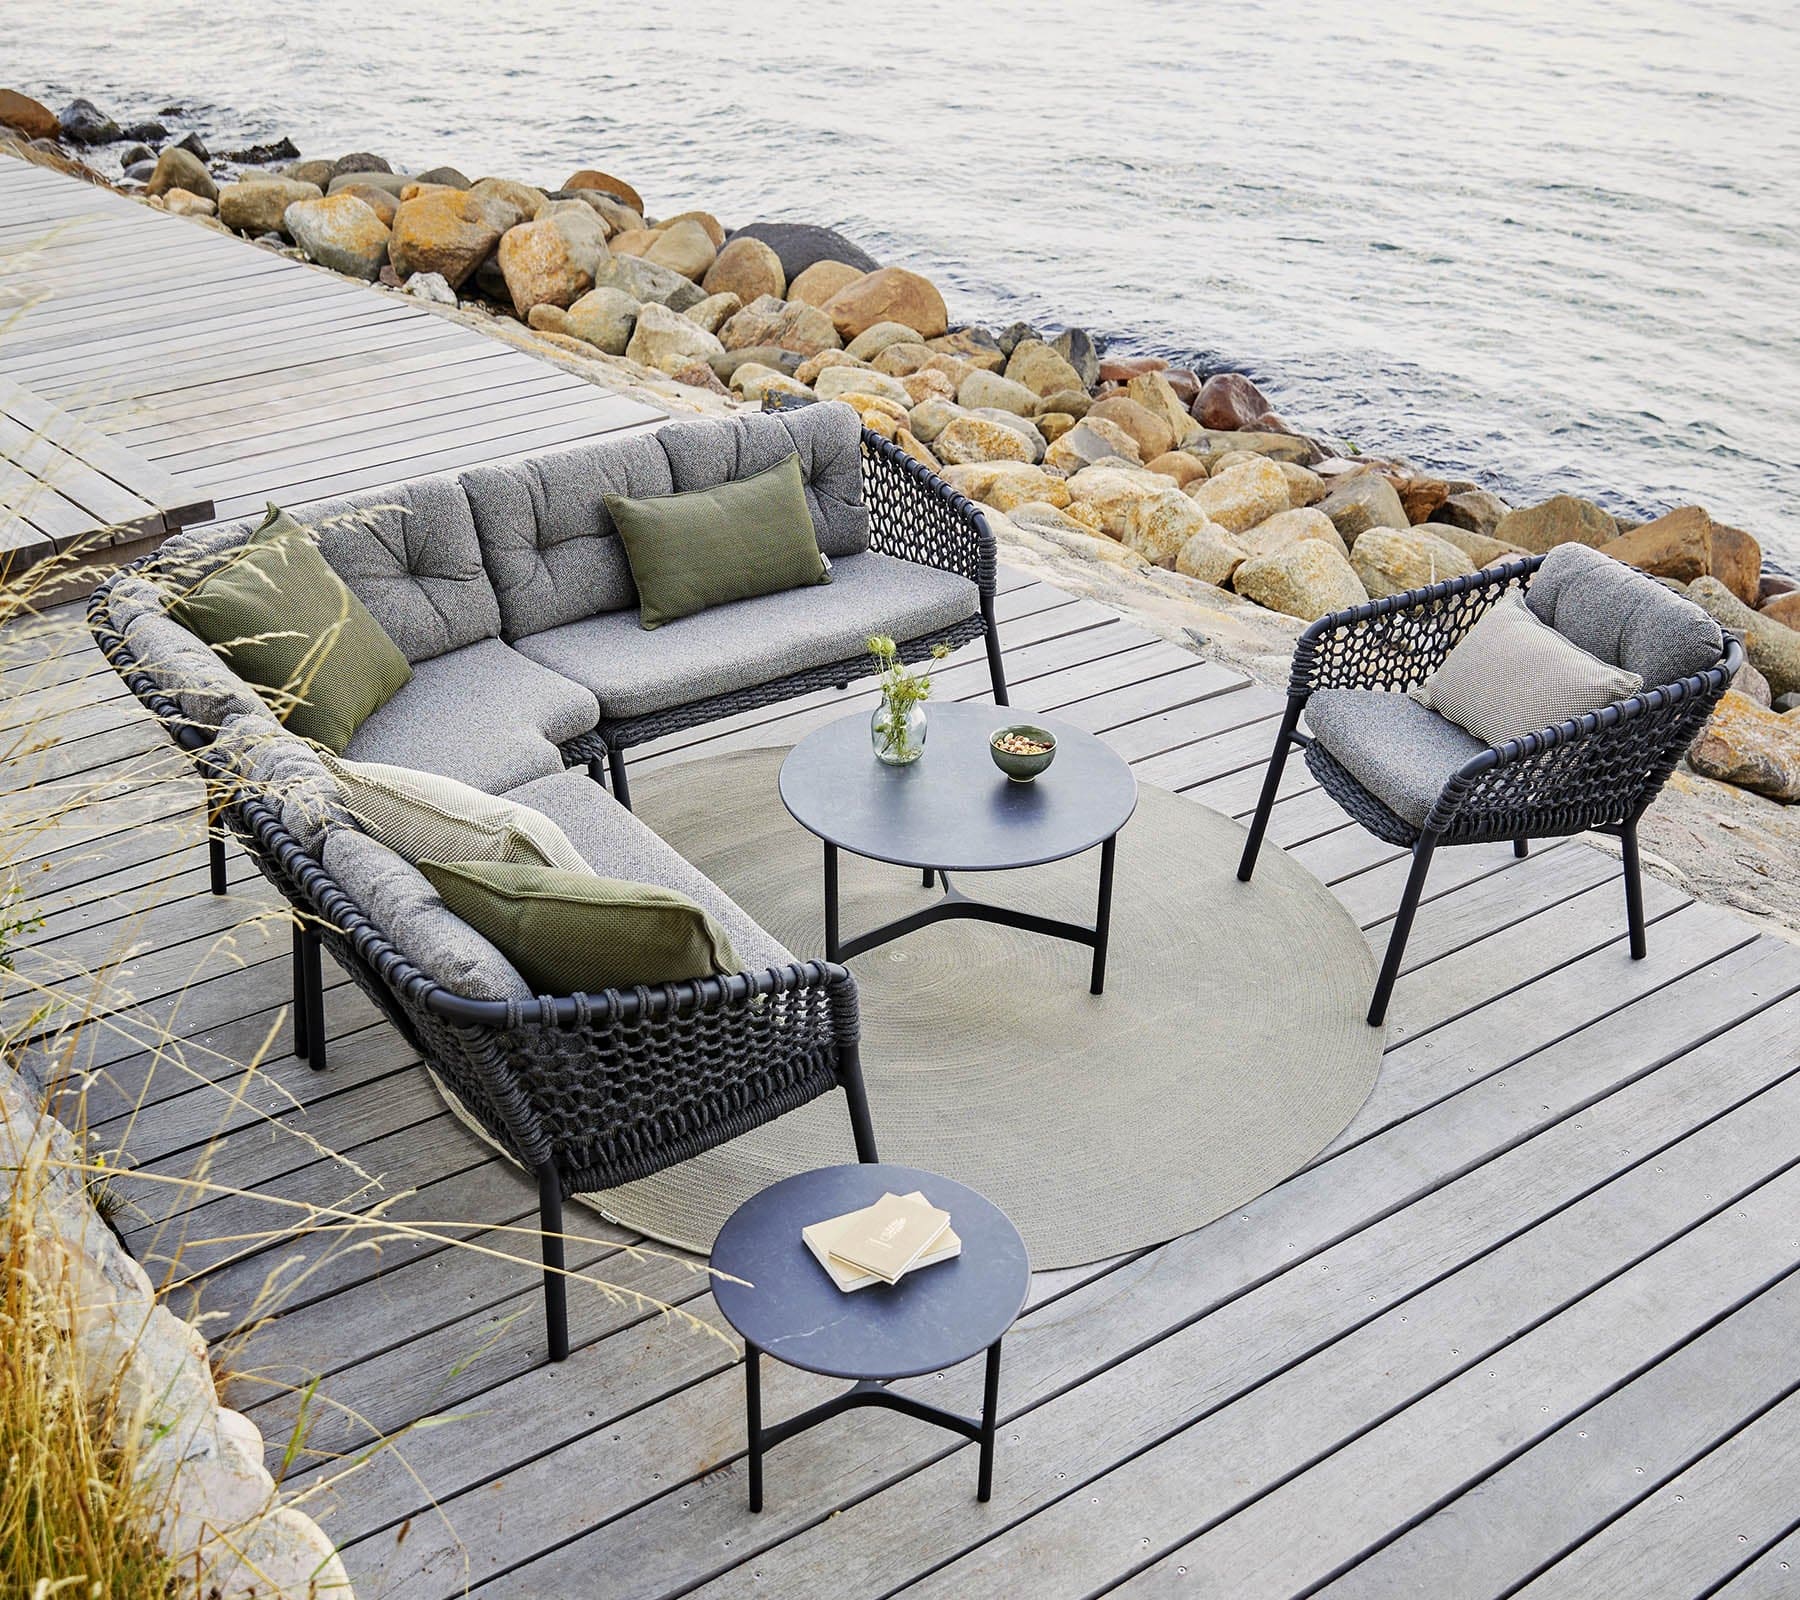  Boxhill's Twist grey outdoor round coffee table with grey sectional sofa and grey lounge chair set on wooden platform beside seashore